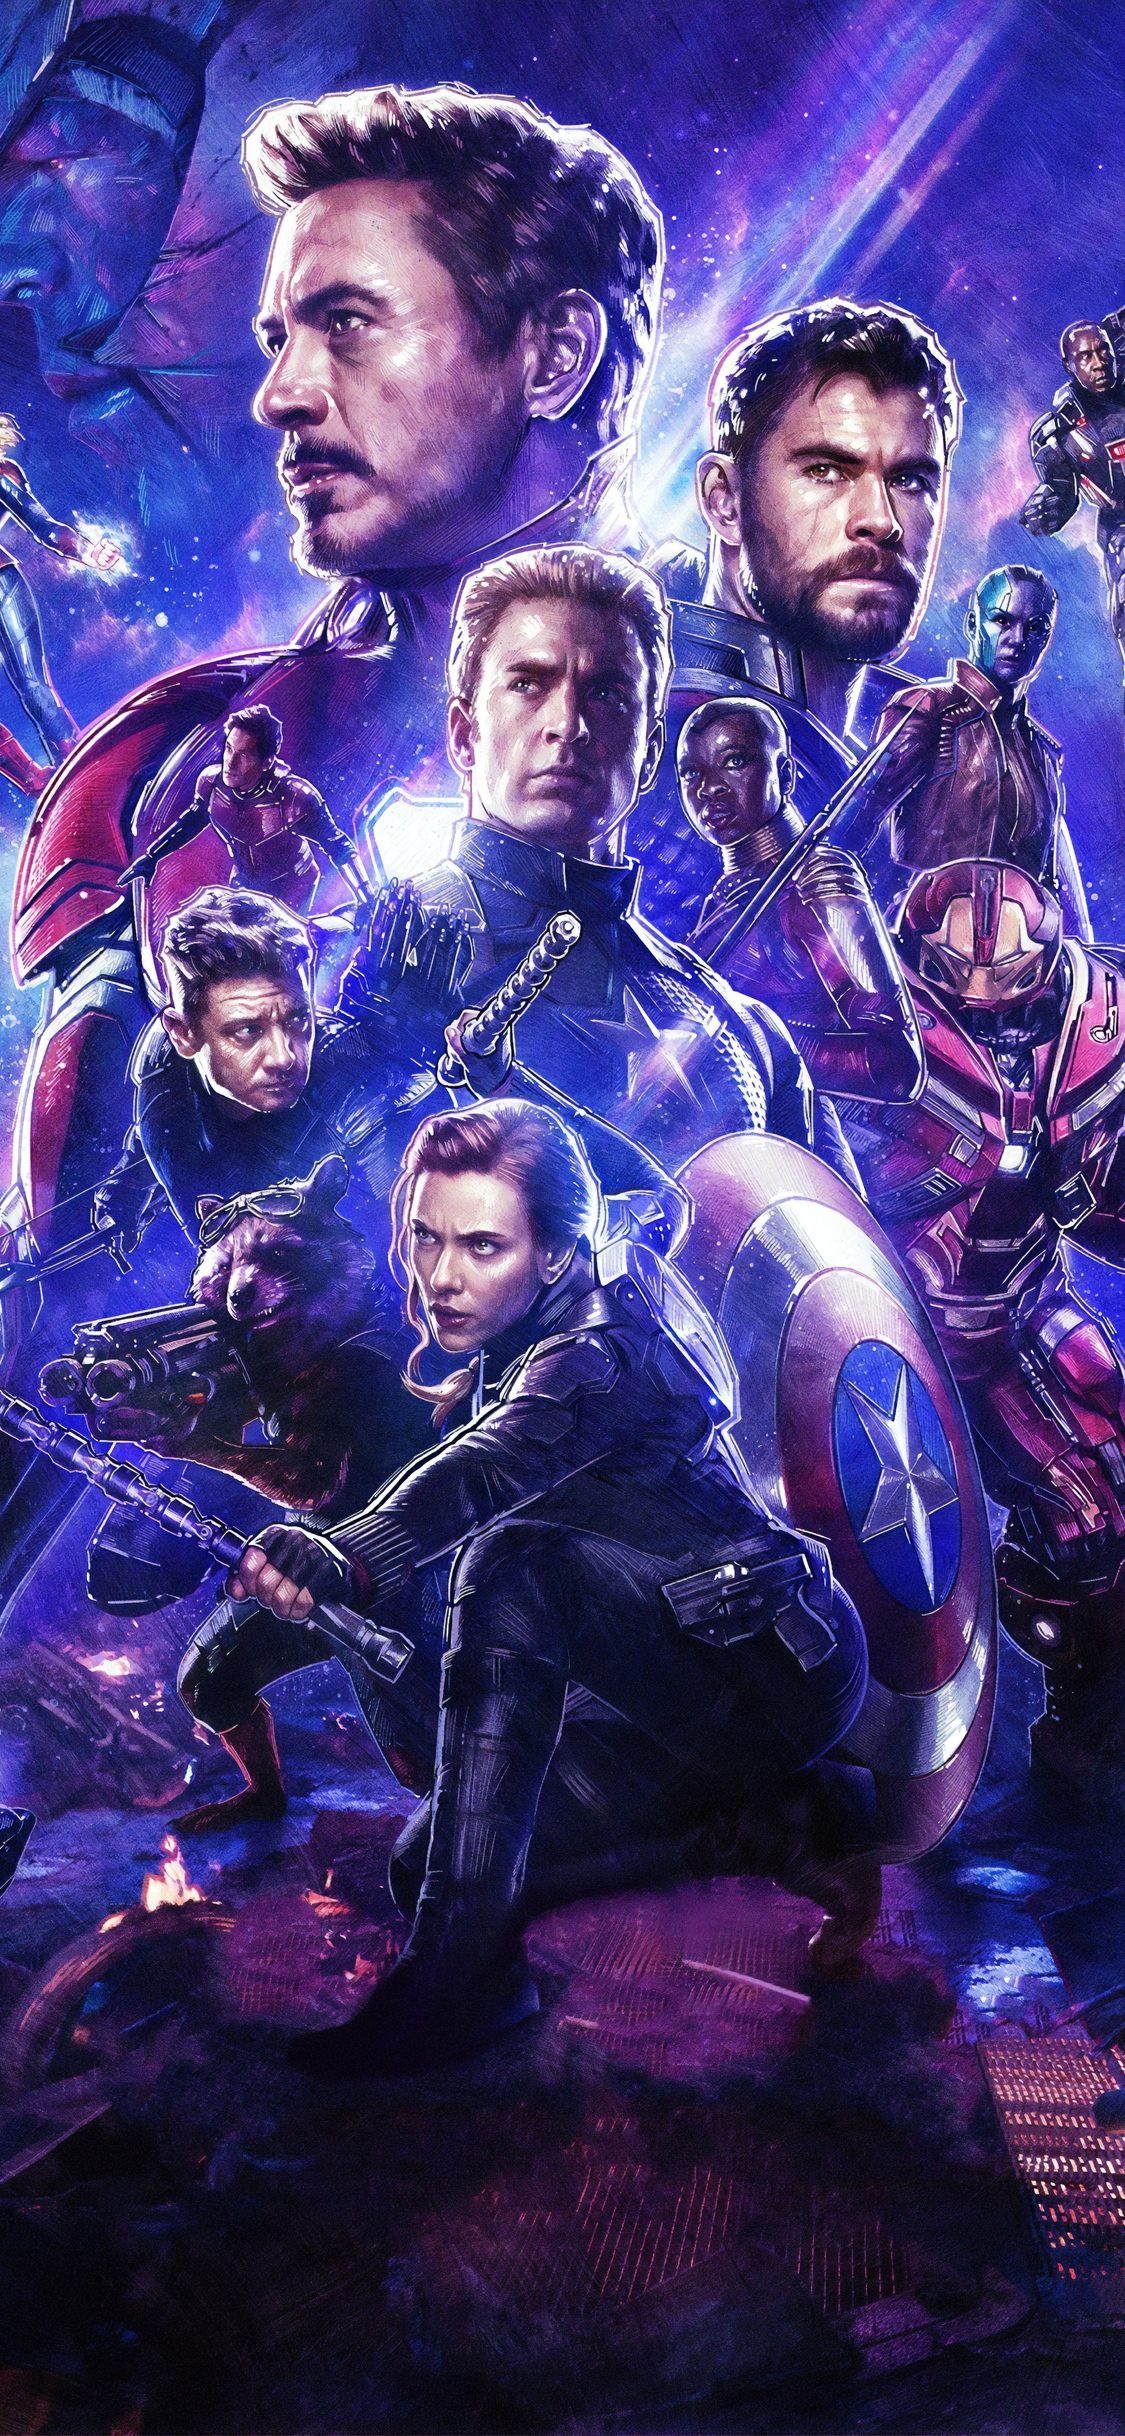 1125x2436 Avengers Endgame 4k Iphone XS,Iphone 10,Iphone X HD 4k Wallpapers, Images, Backgrounds 